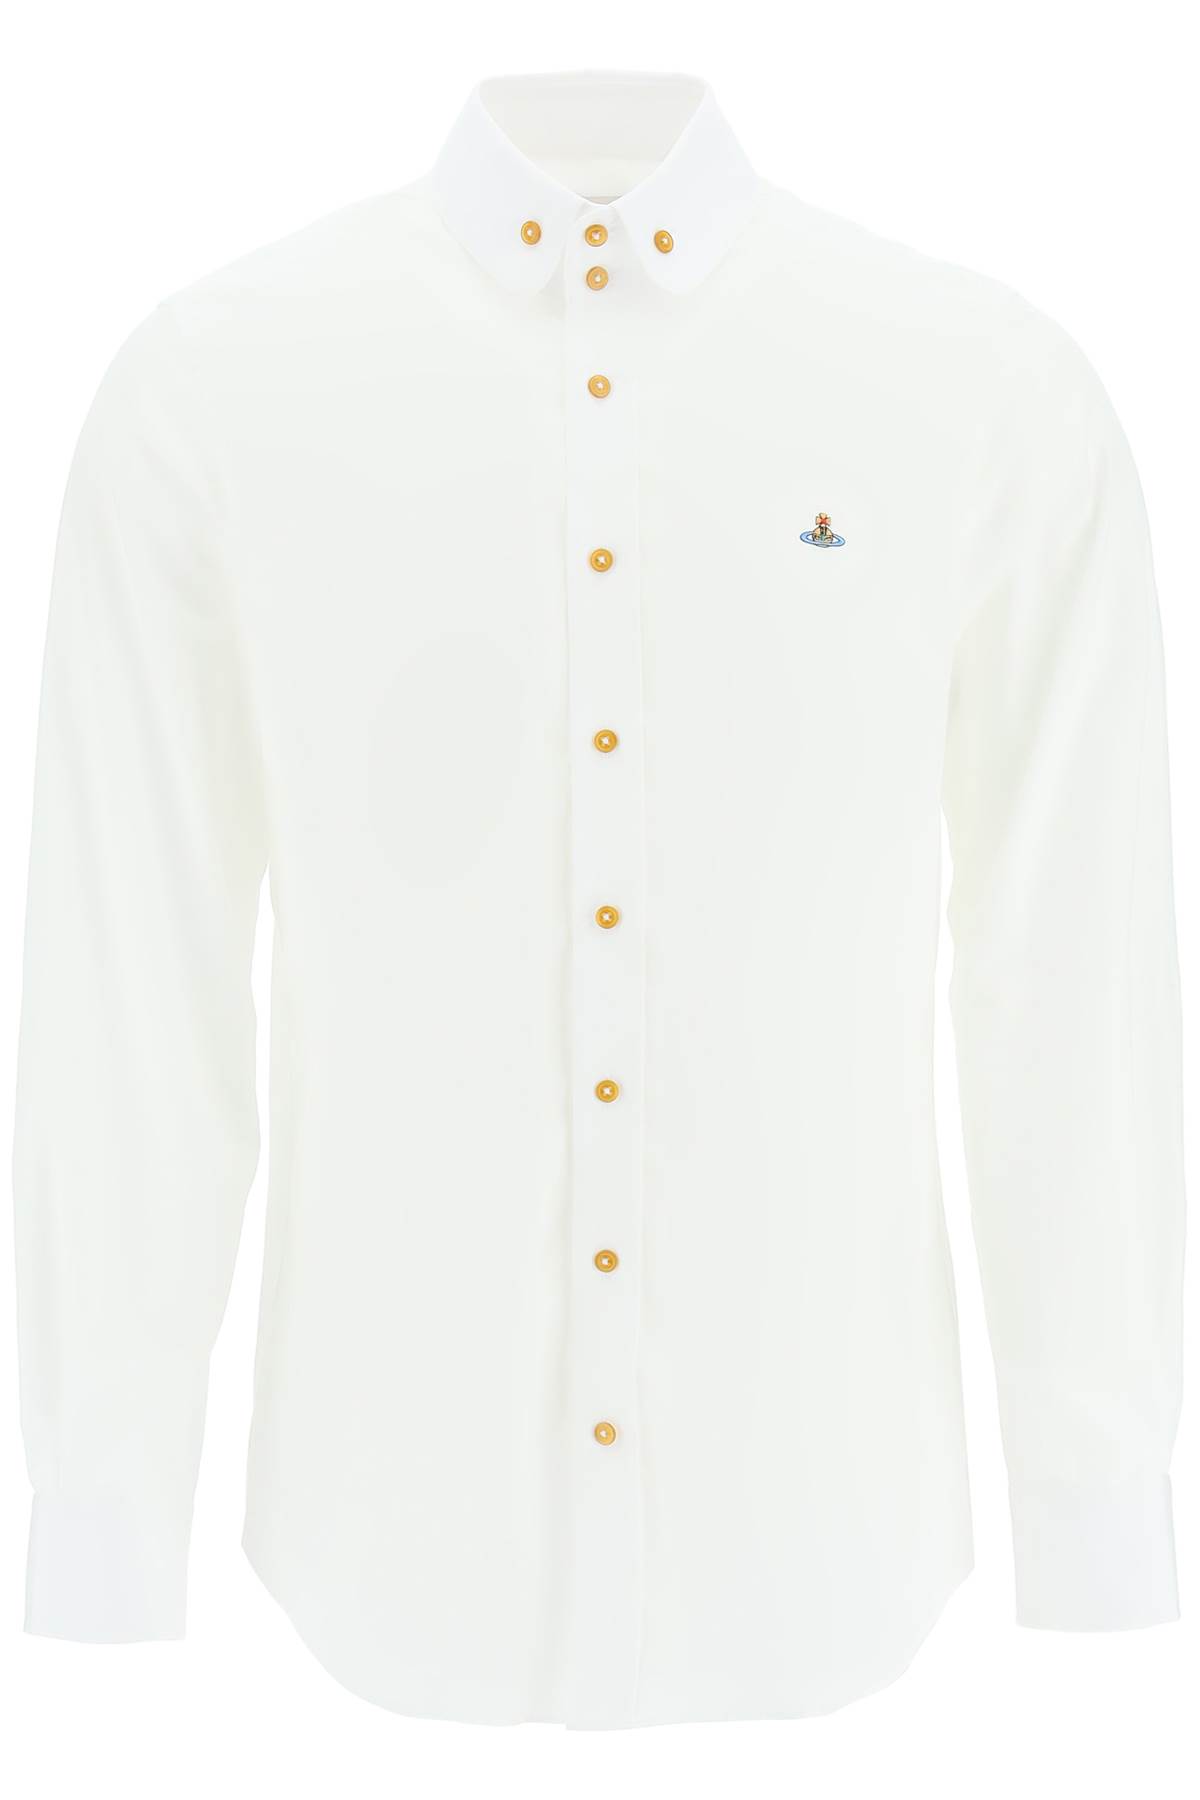 VIVIENNE WESTWOOD POPLIN SHIRT WITH BUTTON-DOWN COLLAR AND ORB EMBROIDERY